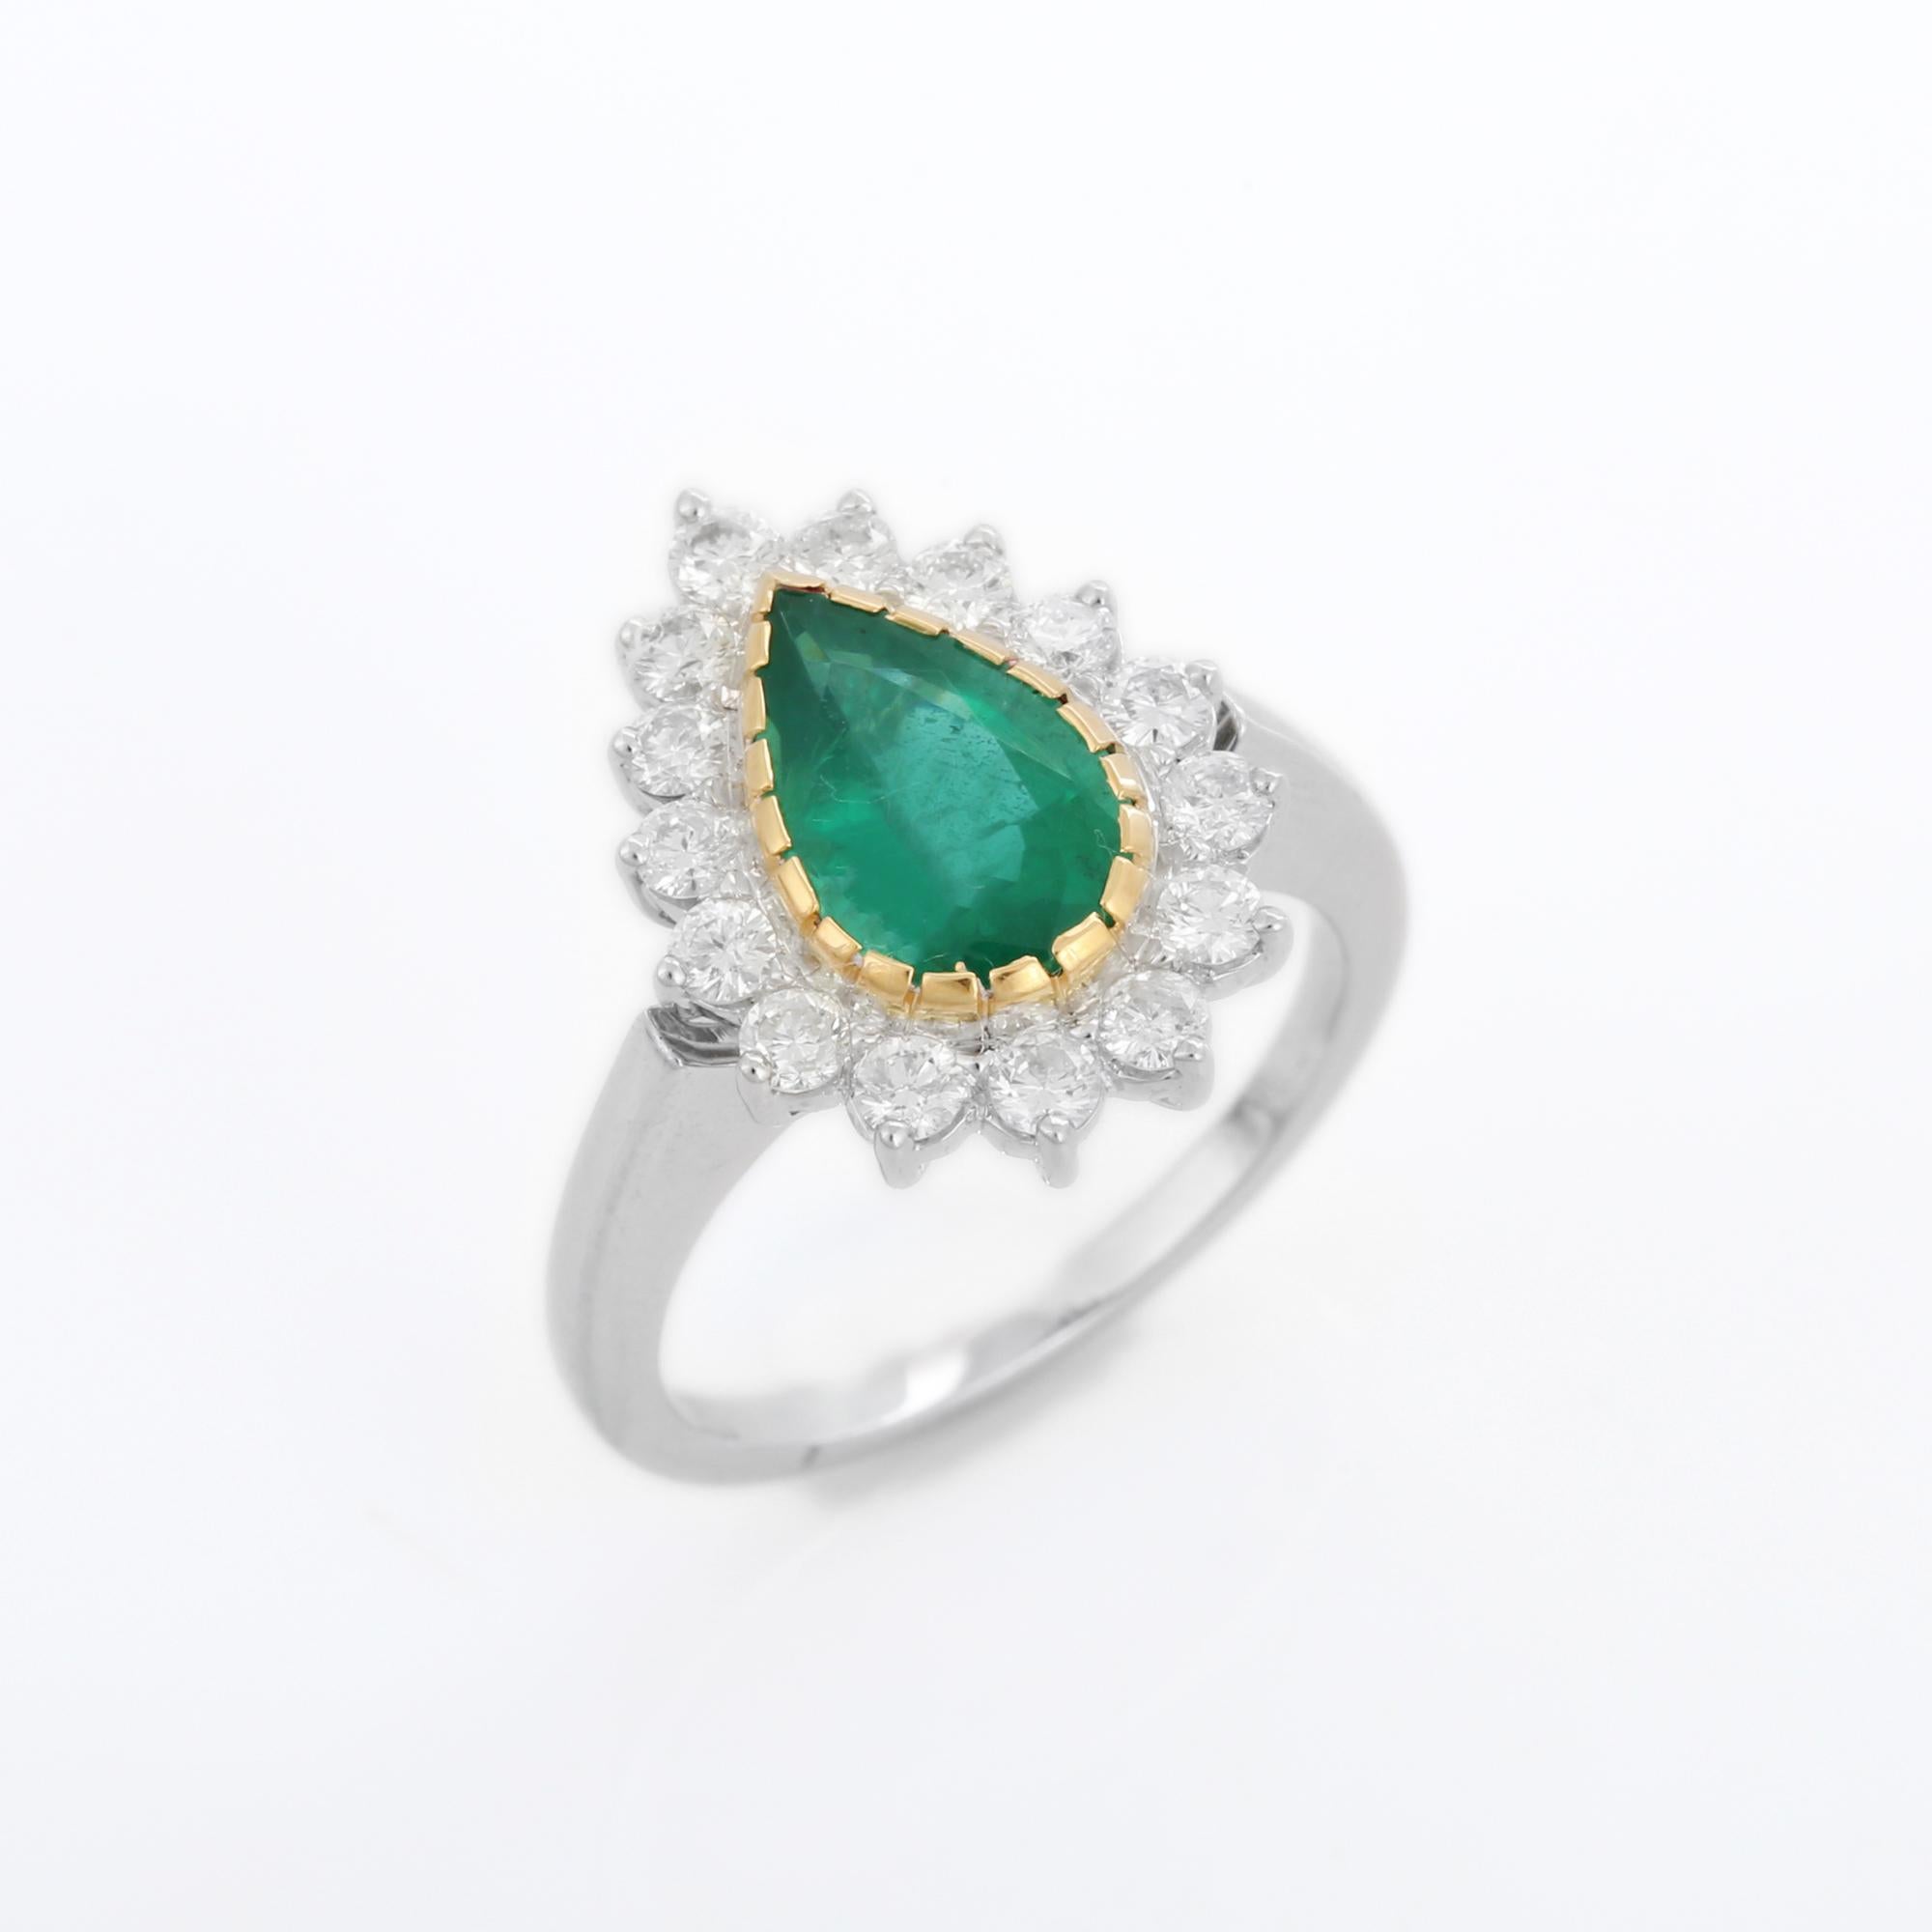 For Sale:  Statement 18k Solid White Gold Pear Emerald Halo Wedding Ring with Diamonds 7